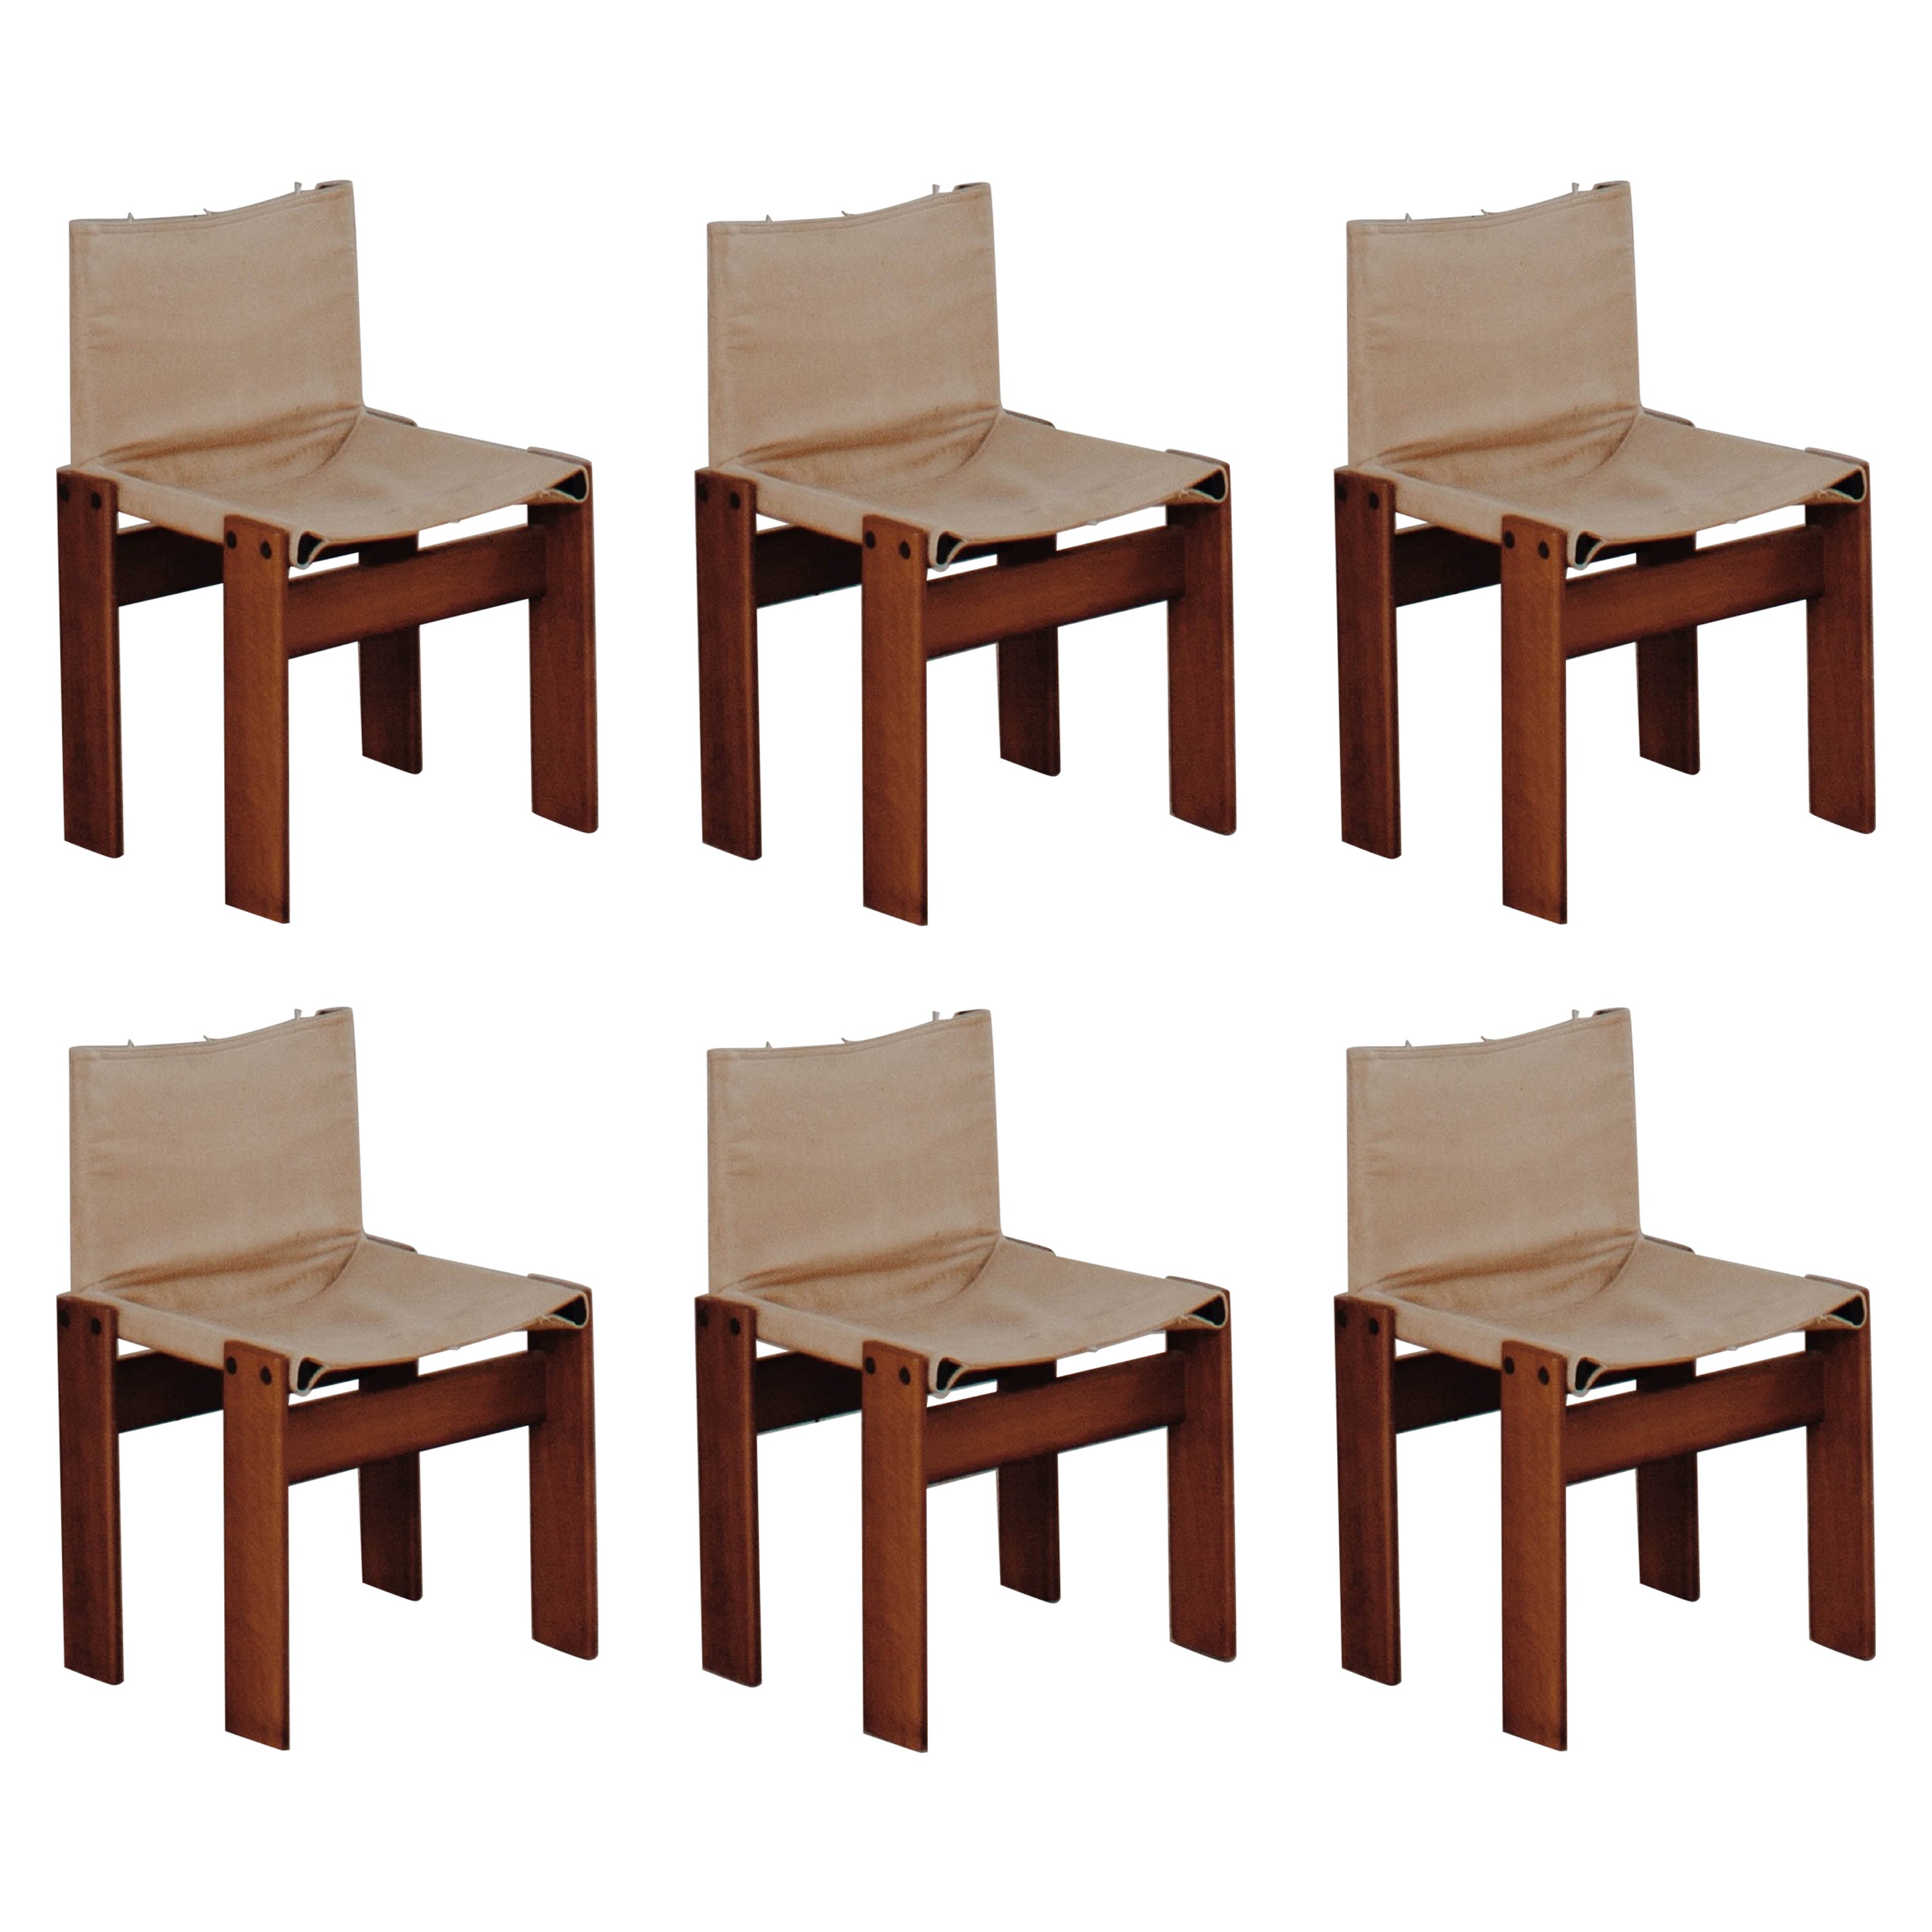 Afra & Tobia Scarpa "Monk" Chairs for Molteni, 1974, Set of 6